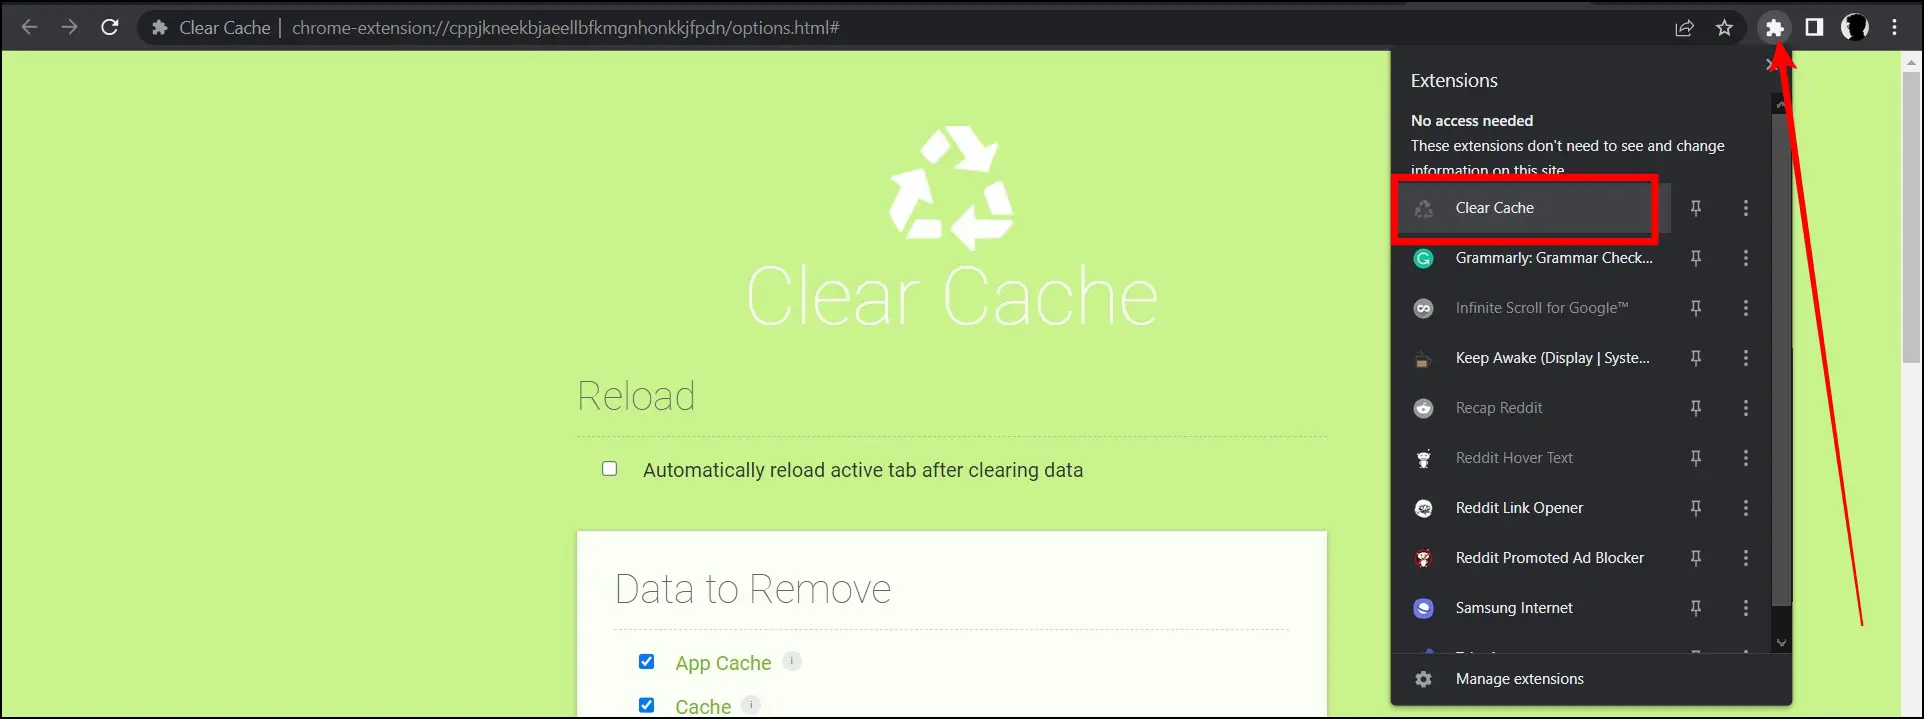 Clear Cache Extension